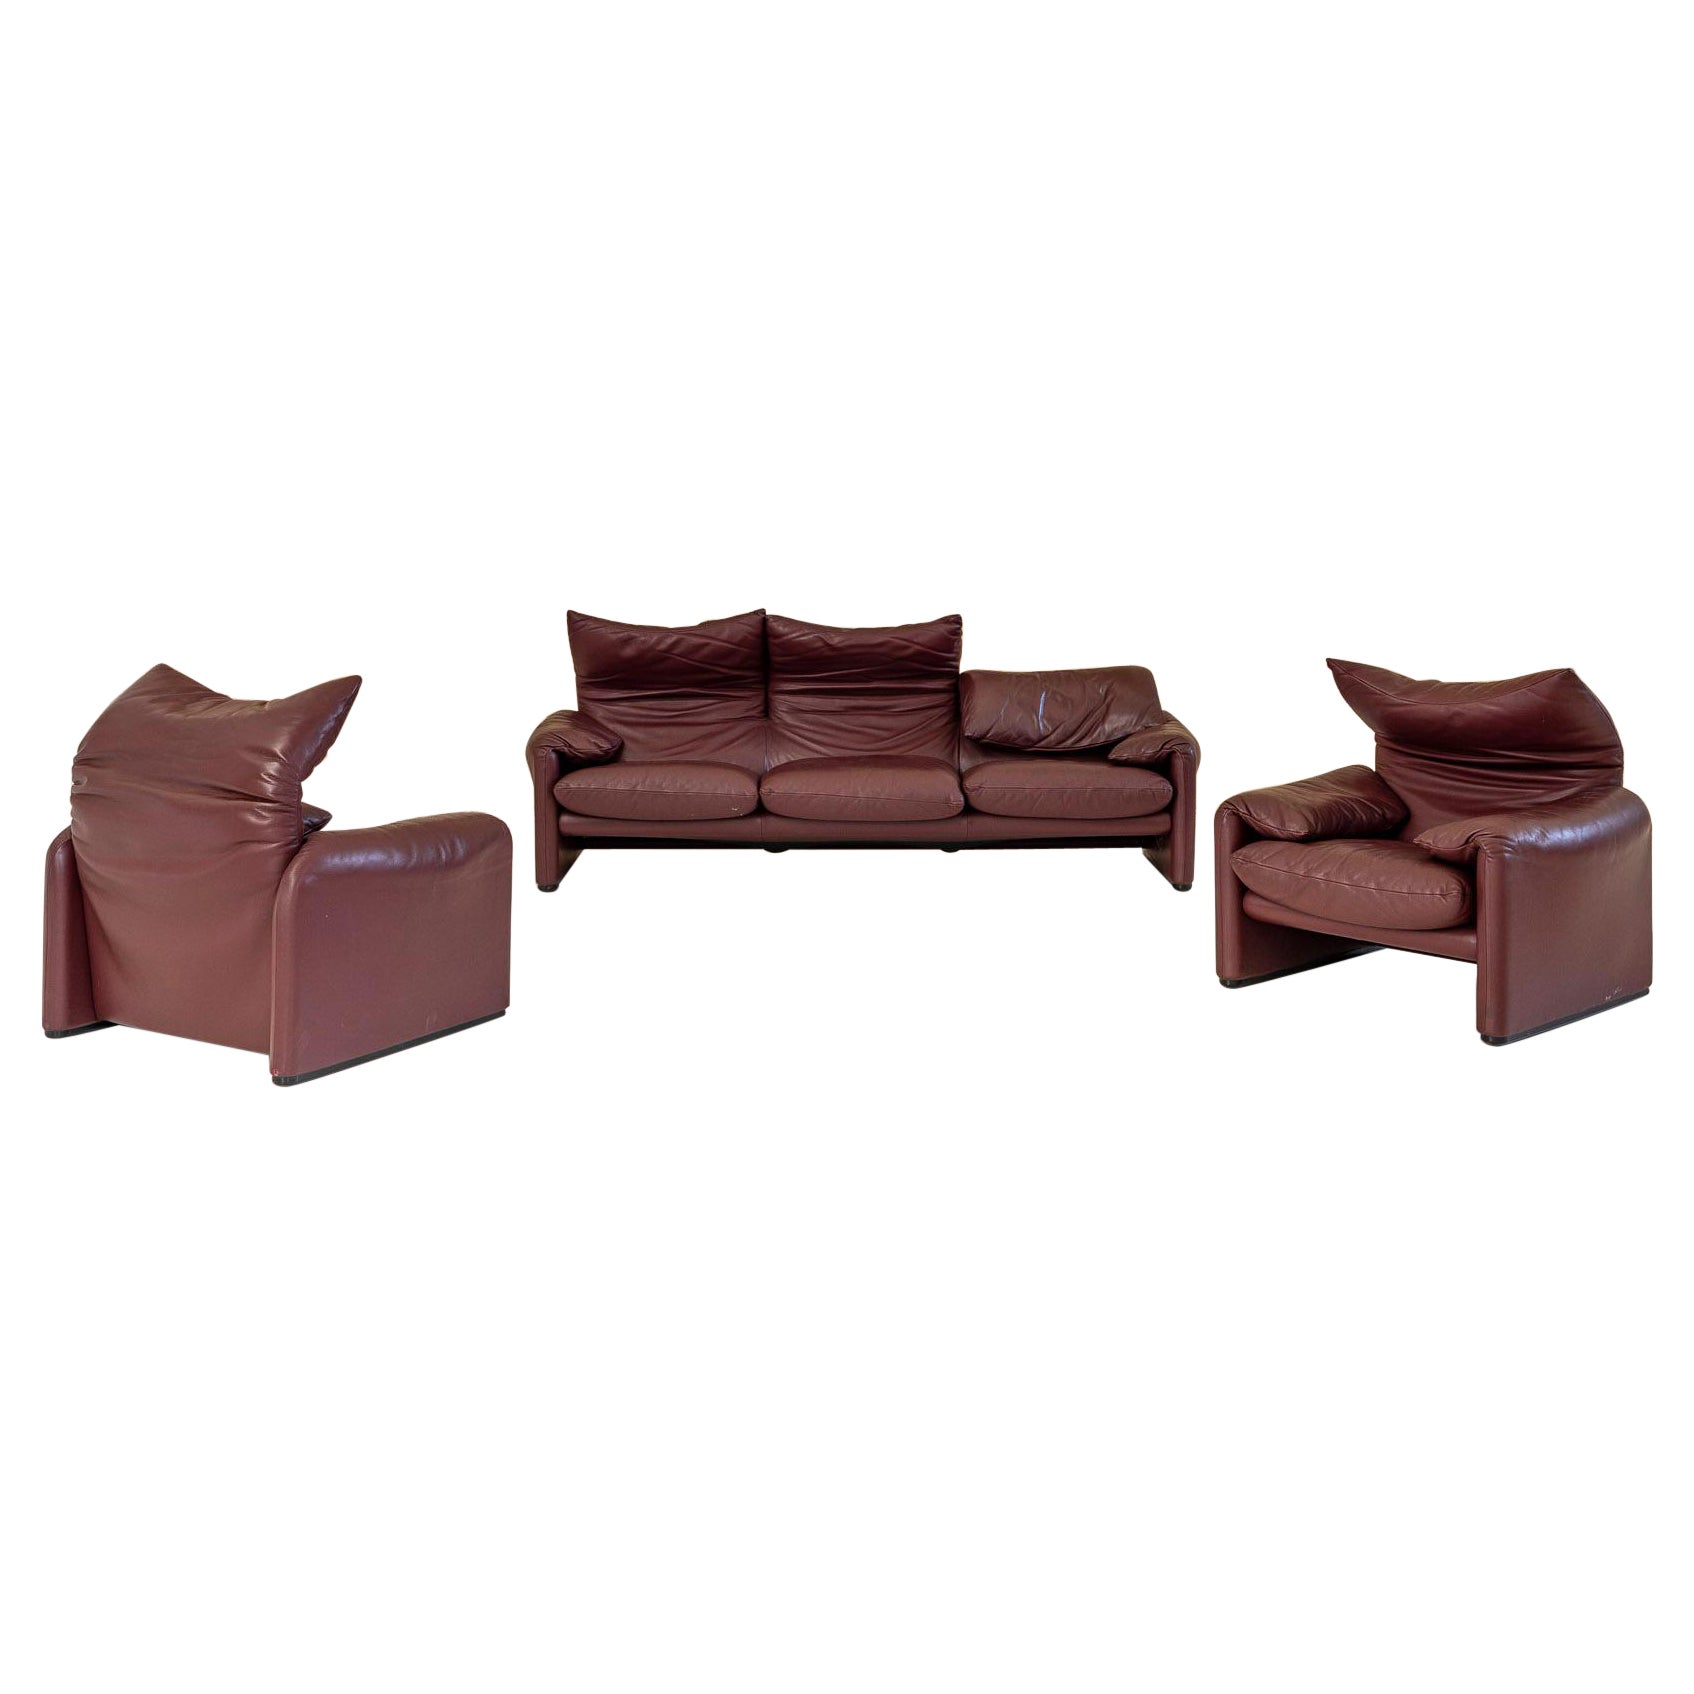 Leather Maralunga Three-Seat Sofa and Armchairs by Vico Magistretti for Cassina